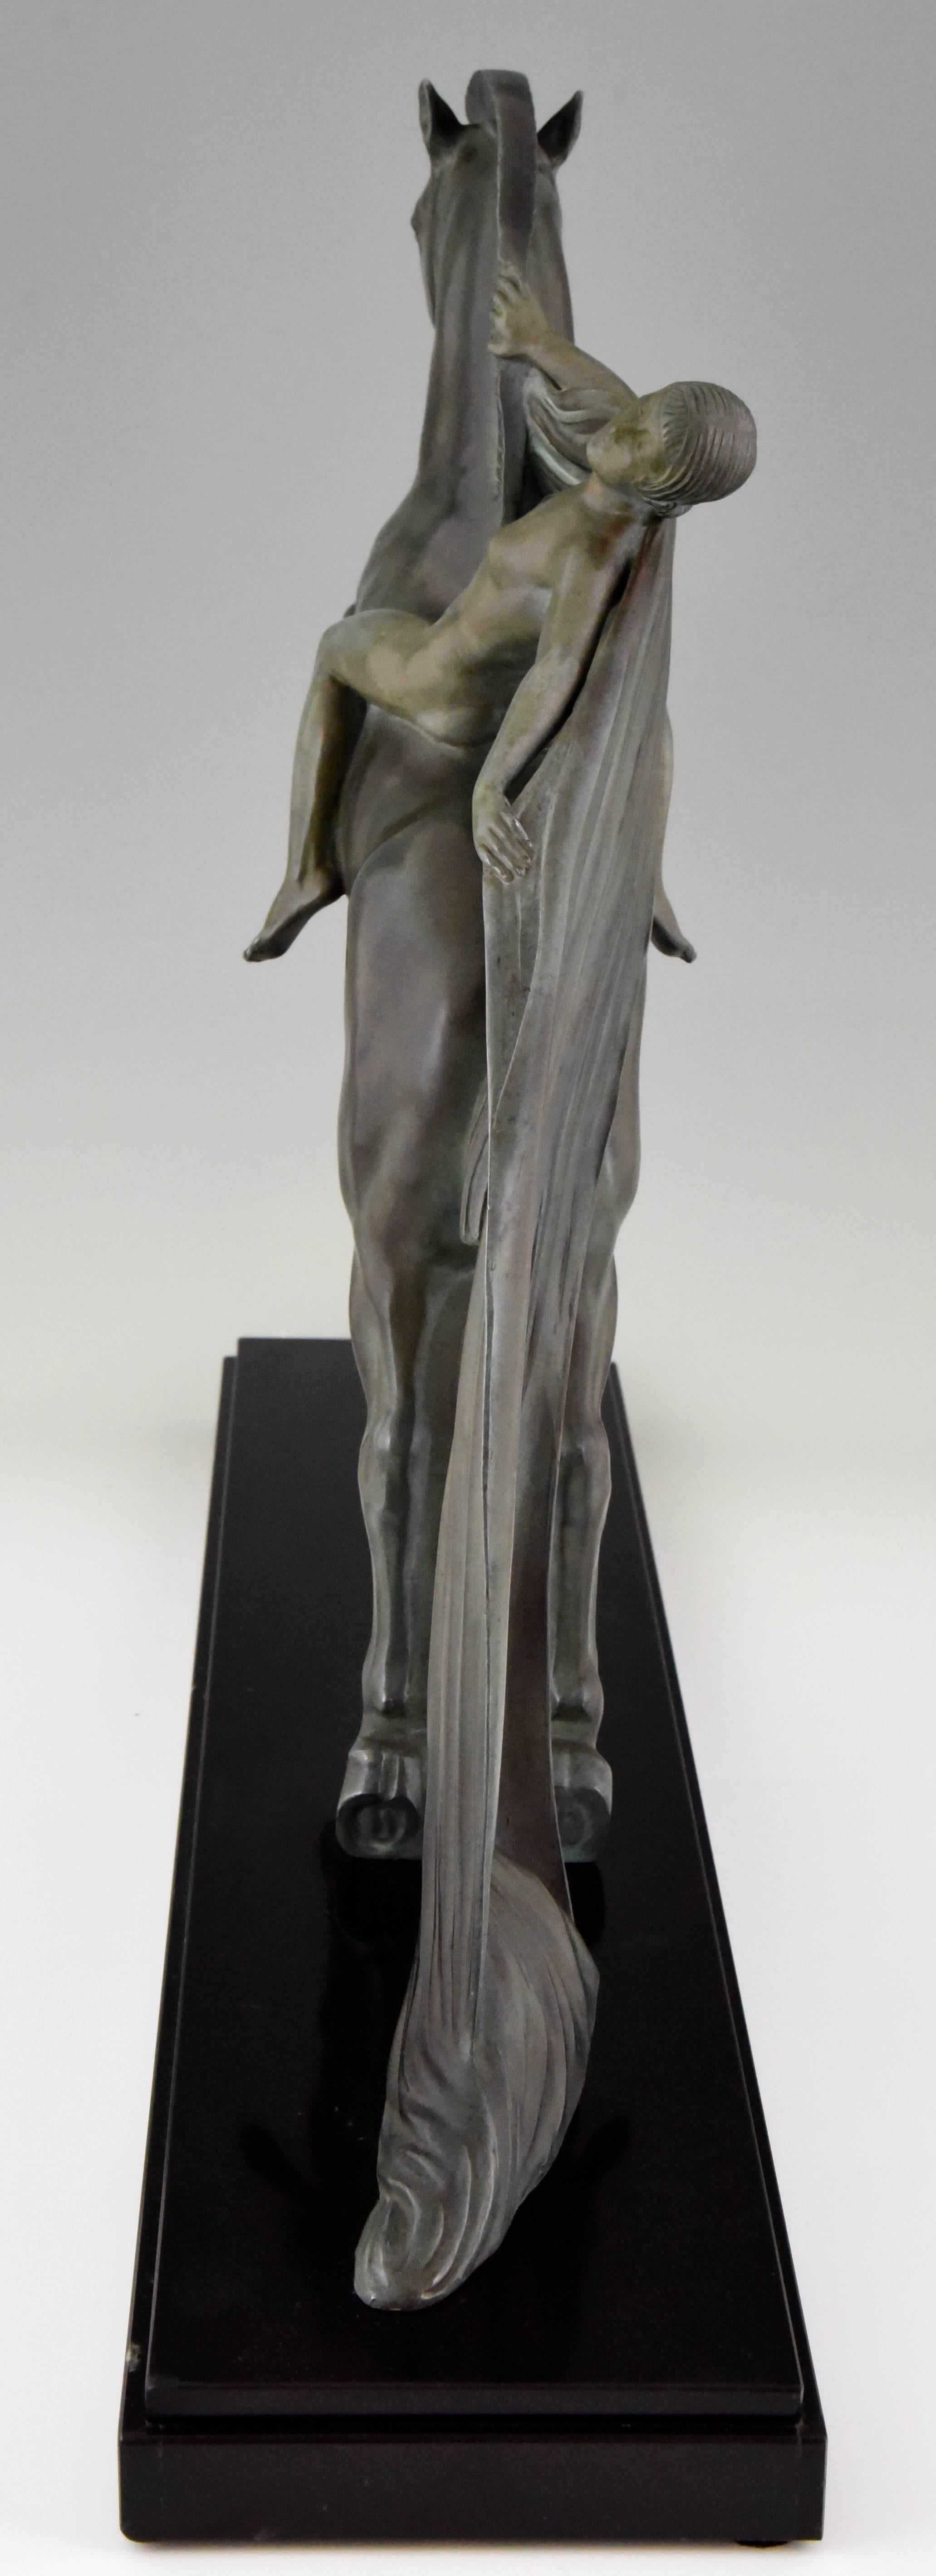 French Art Deco Sculpture Female Nude on a Rearing Horse C. Charles for Max Le Verrier